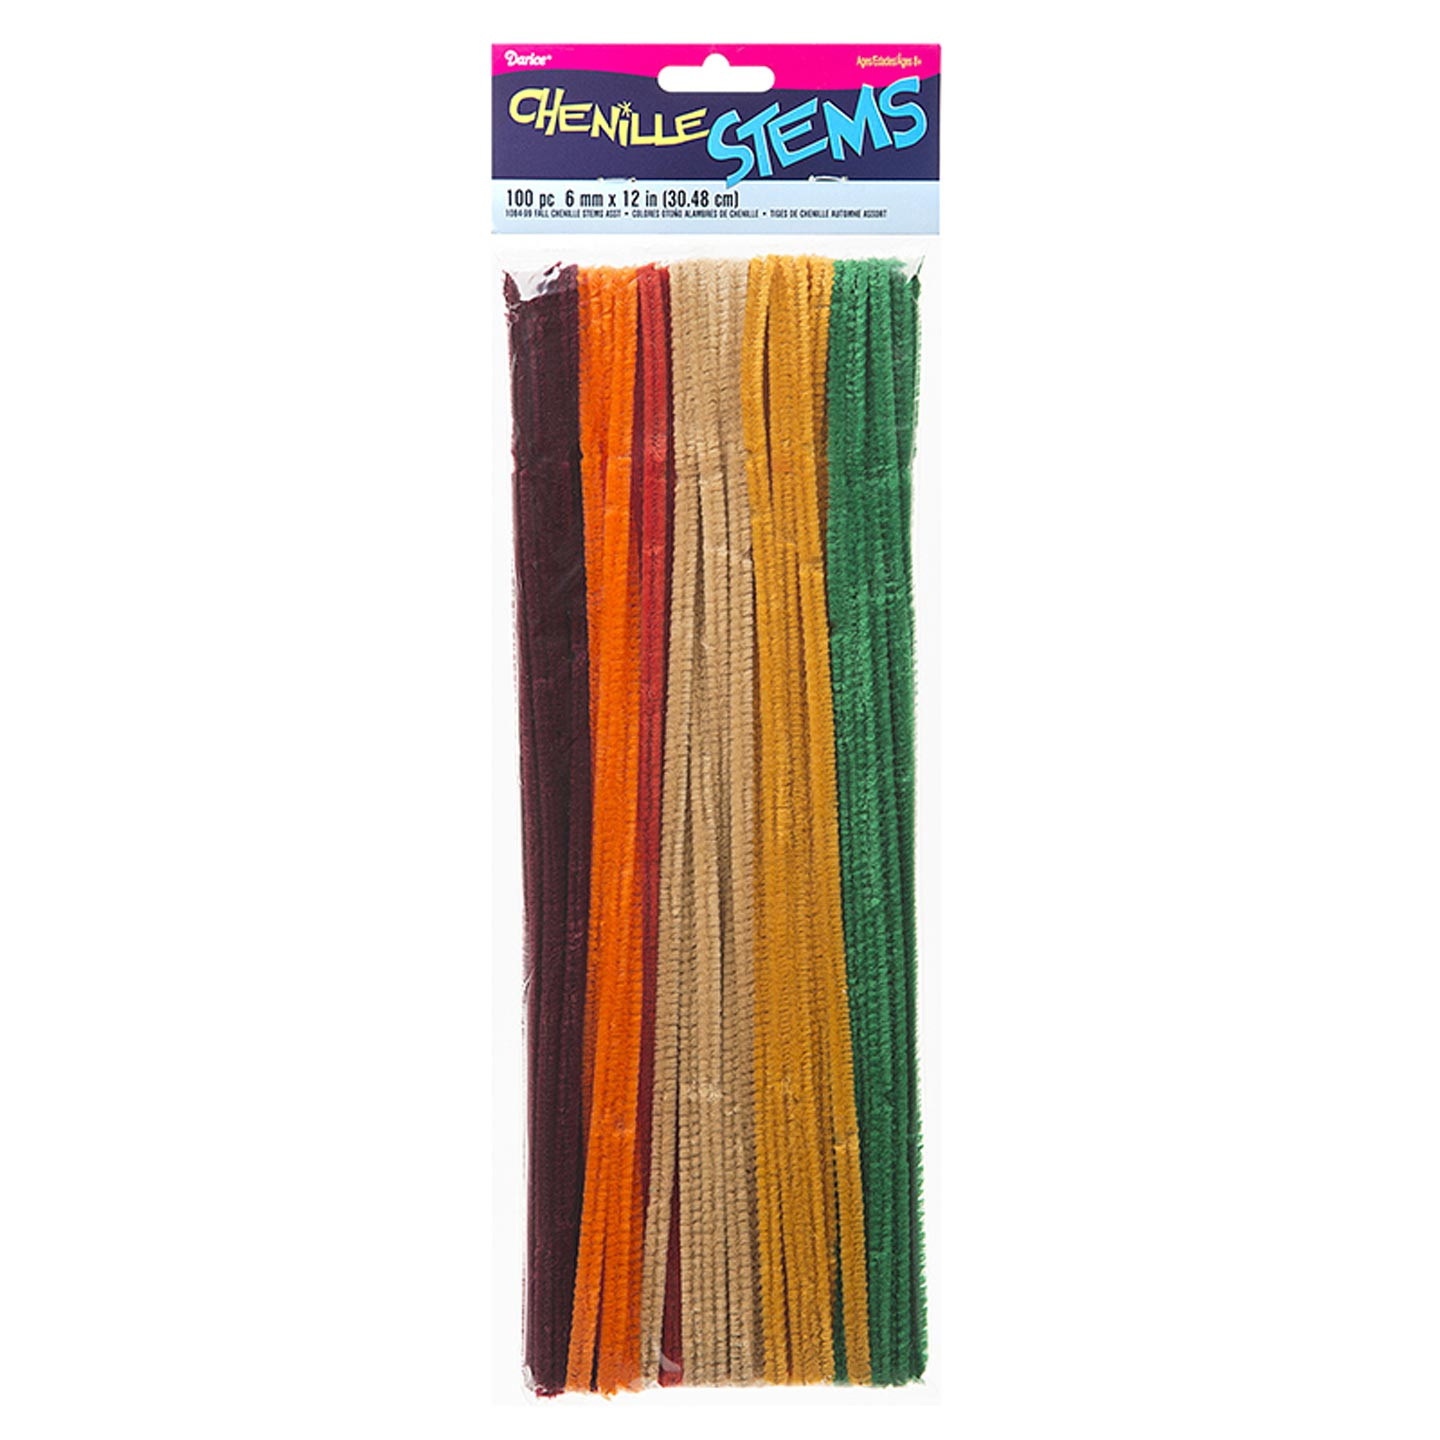 Chenille Stems, Pipe Cleaner, 12-inch (30-cm), 25-pc, Lime Green